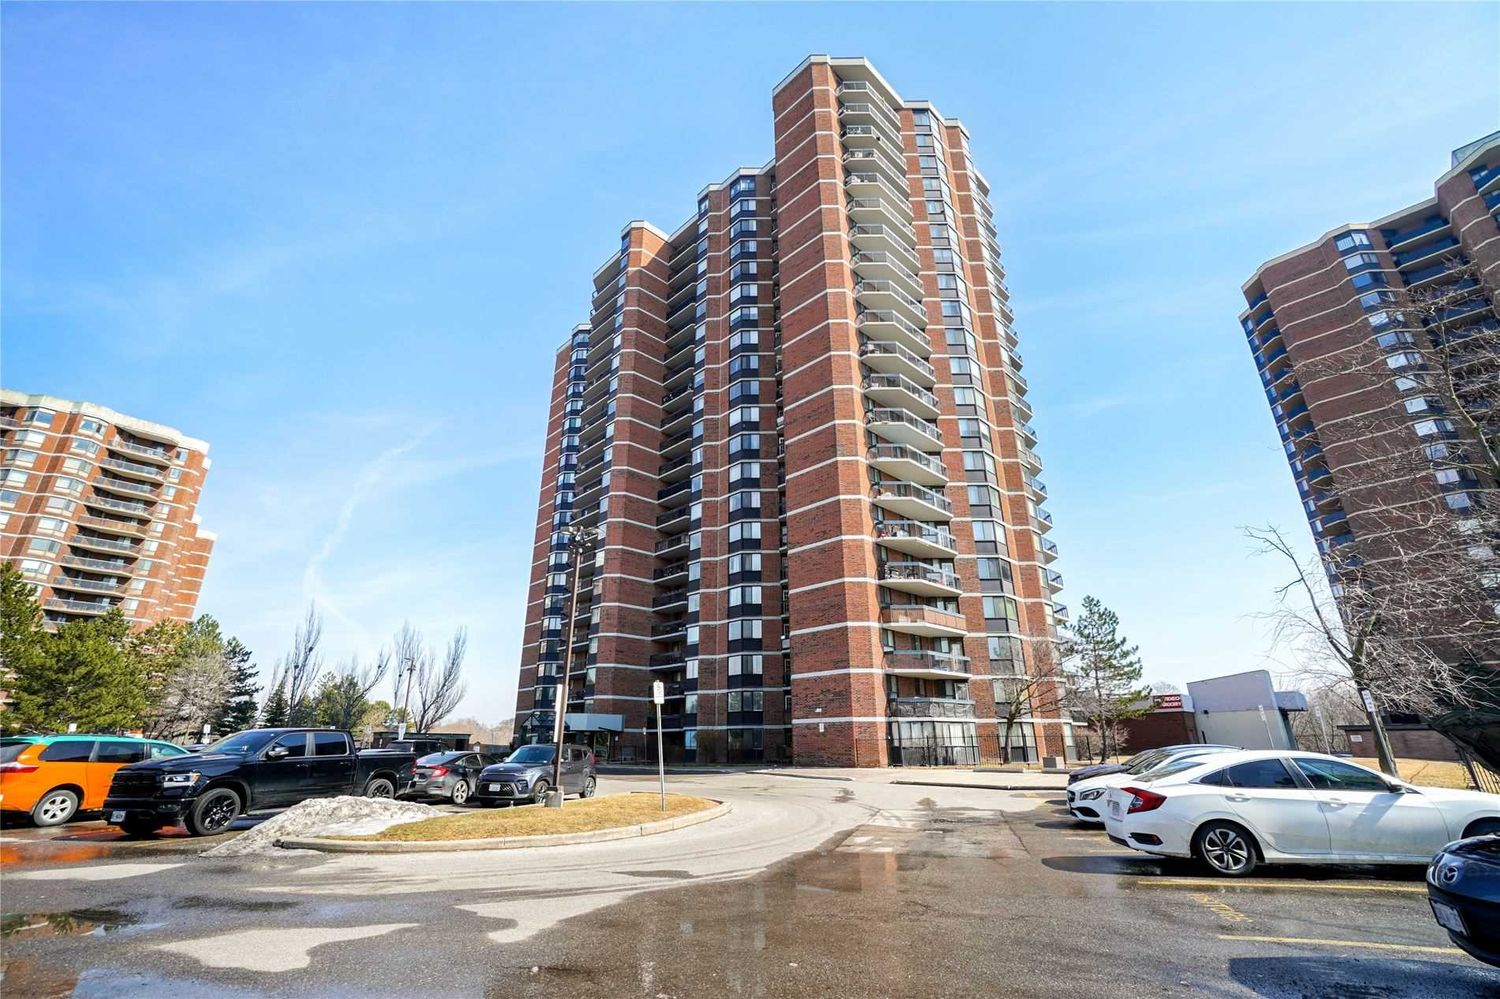 236 Albion Road. 236 Albion Road Condos is located in  Etobicoke, Toronto - image #3 of 3